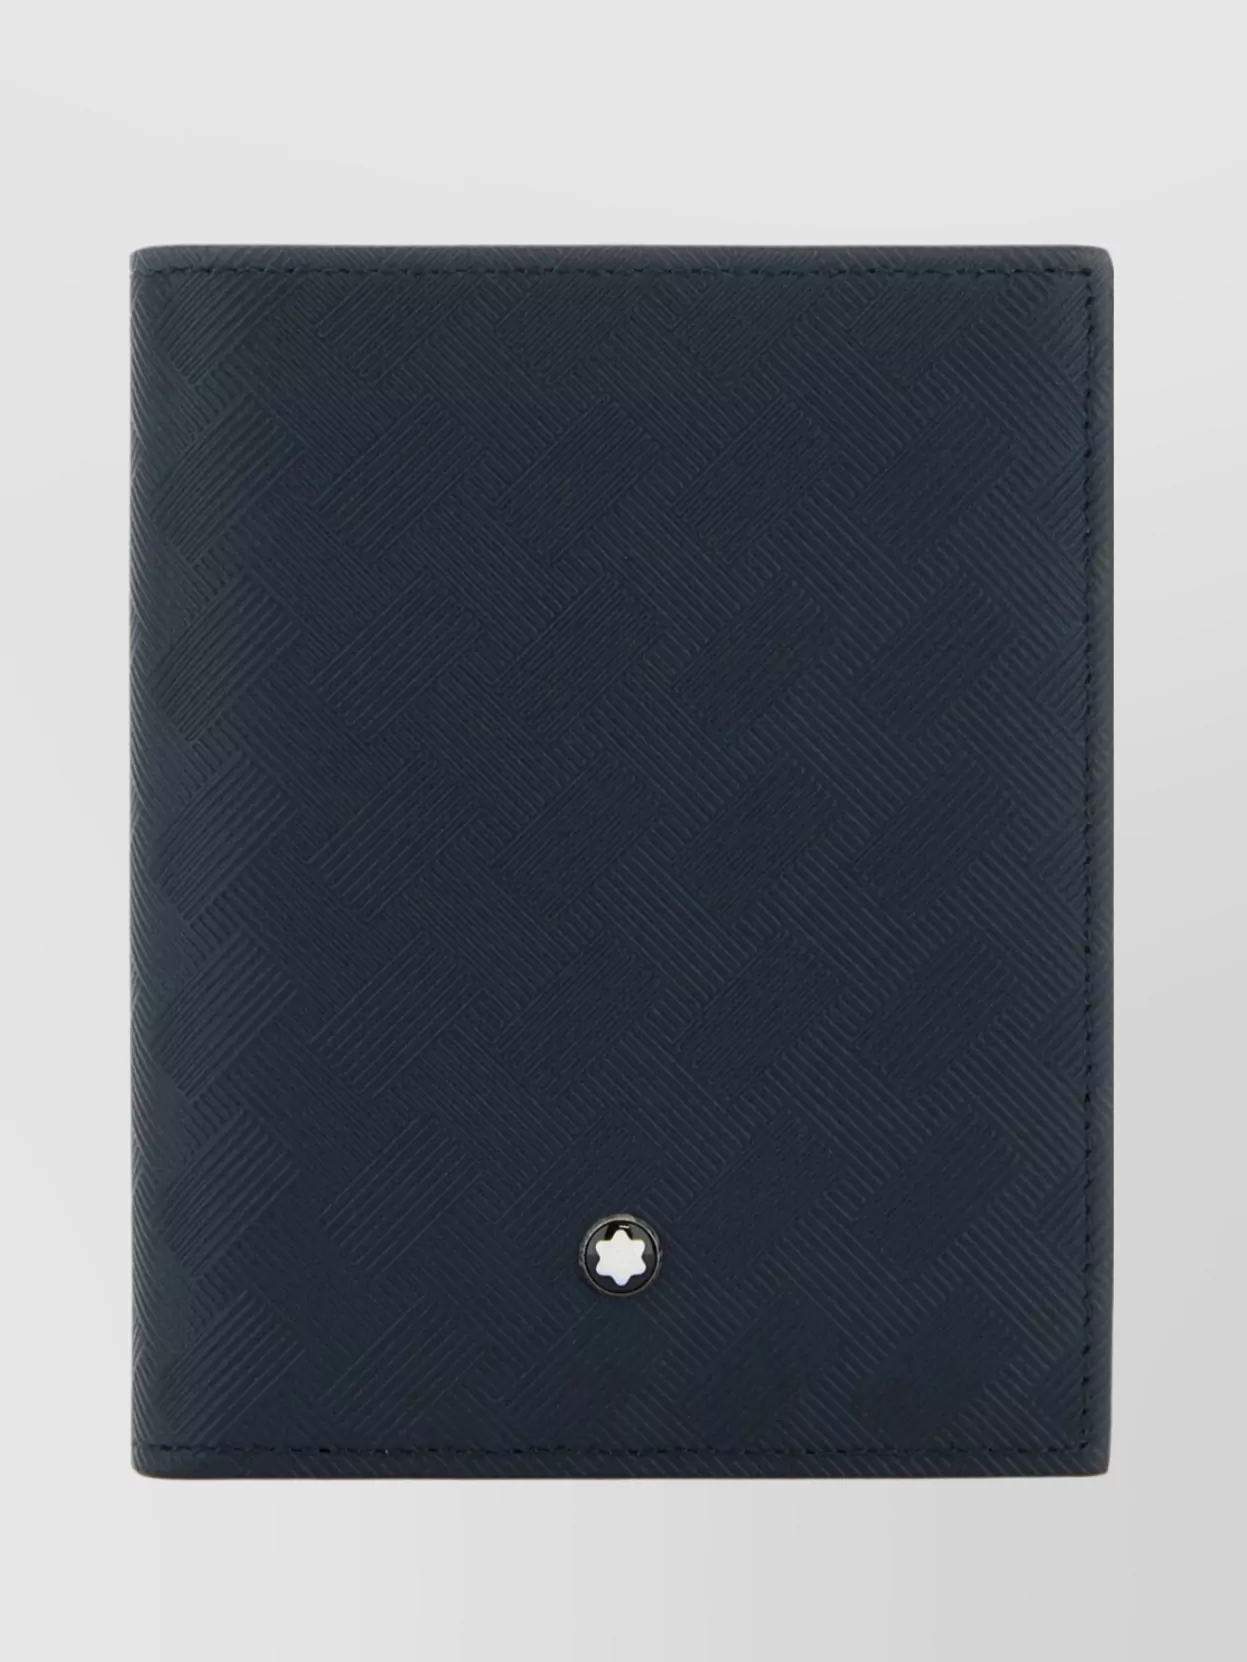 Shop Montblanc Leather Wallet With Bifold Design And Embossed Motif